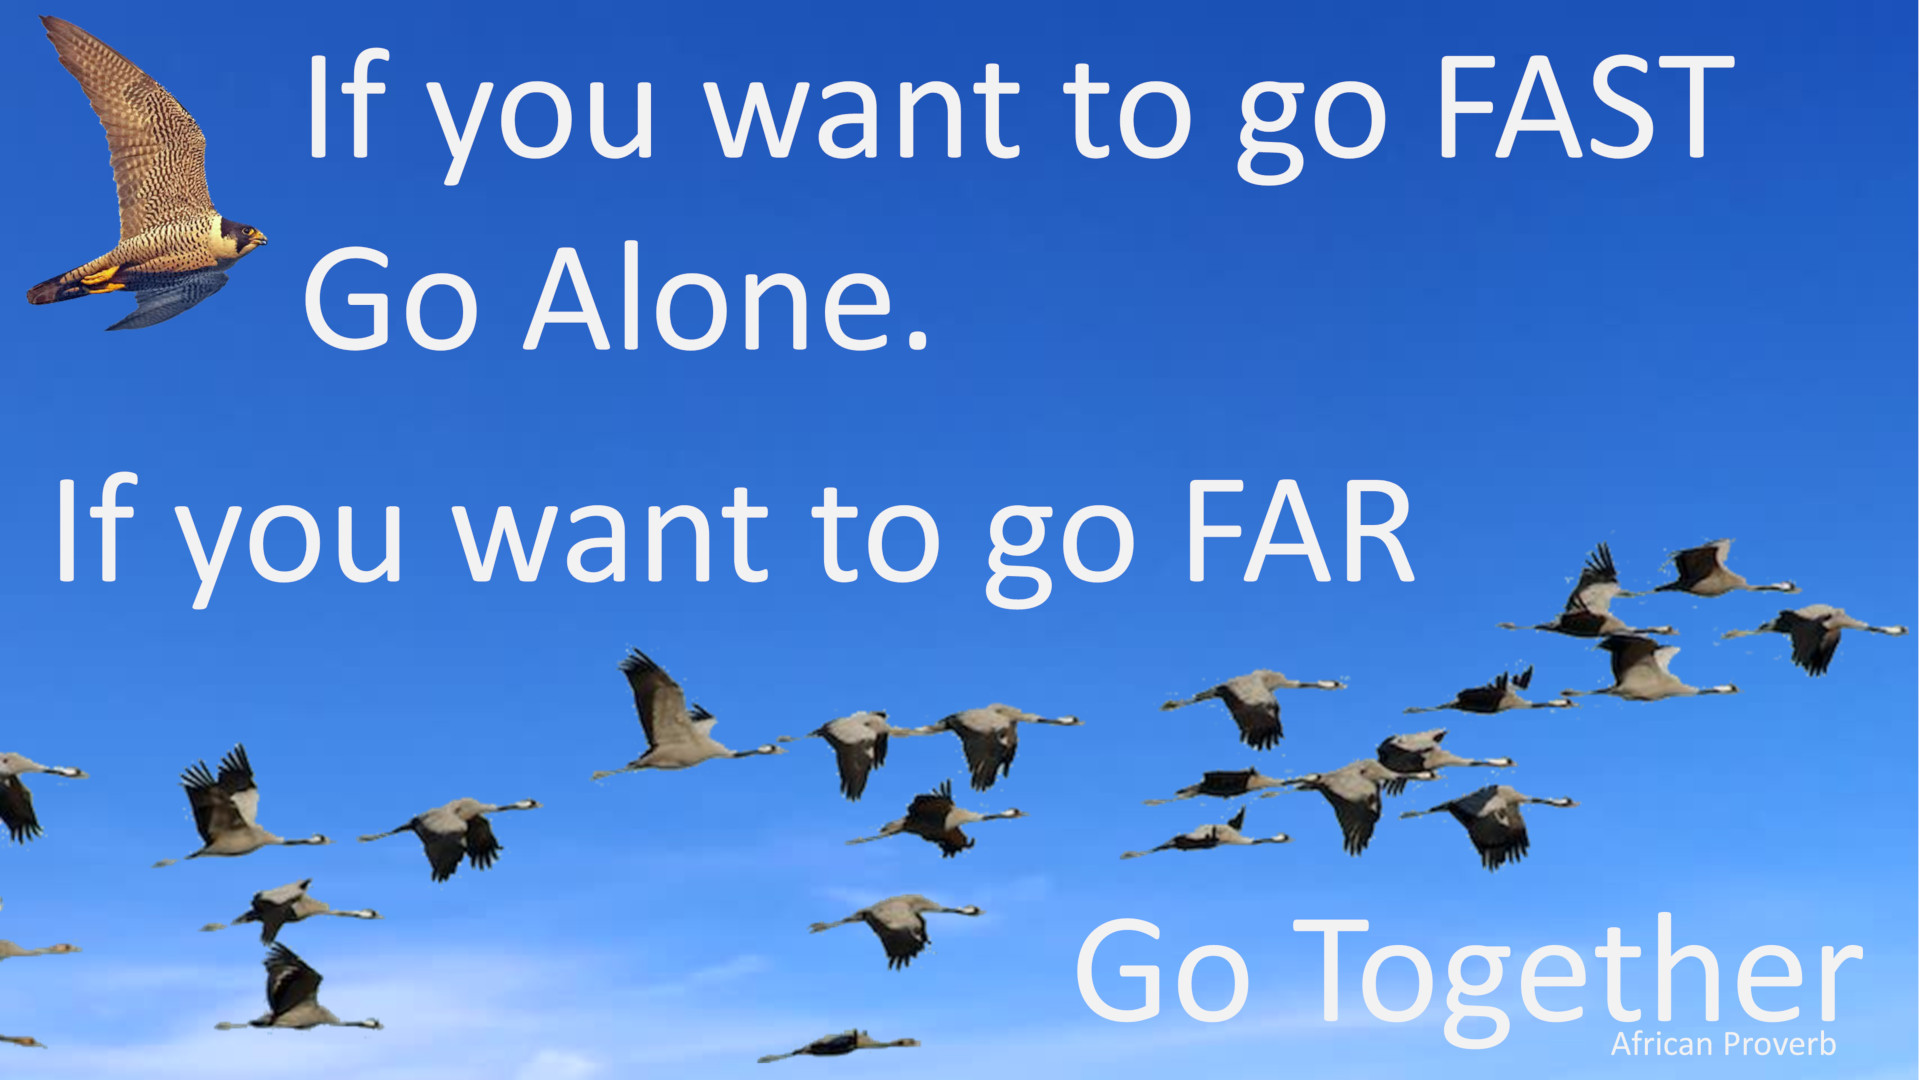 If you want to go Fast, go Alone. If you want to go Far, go Together